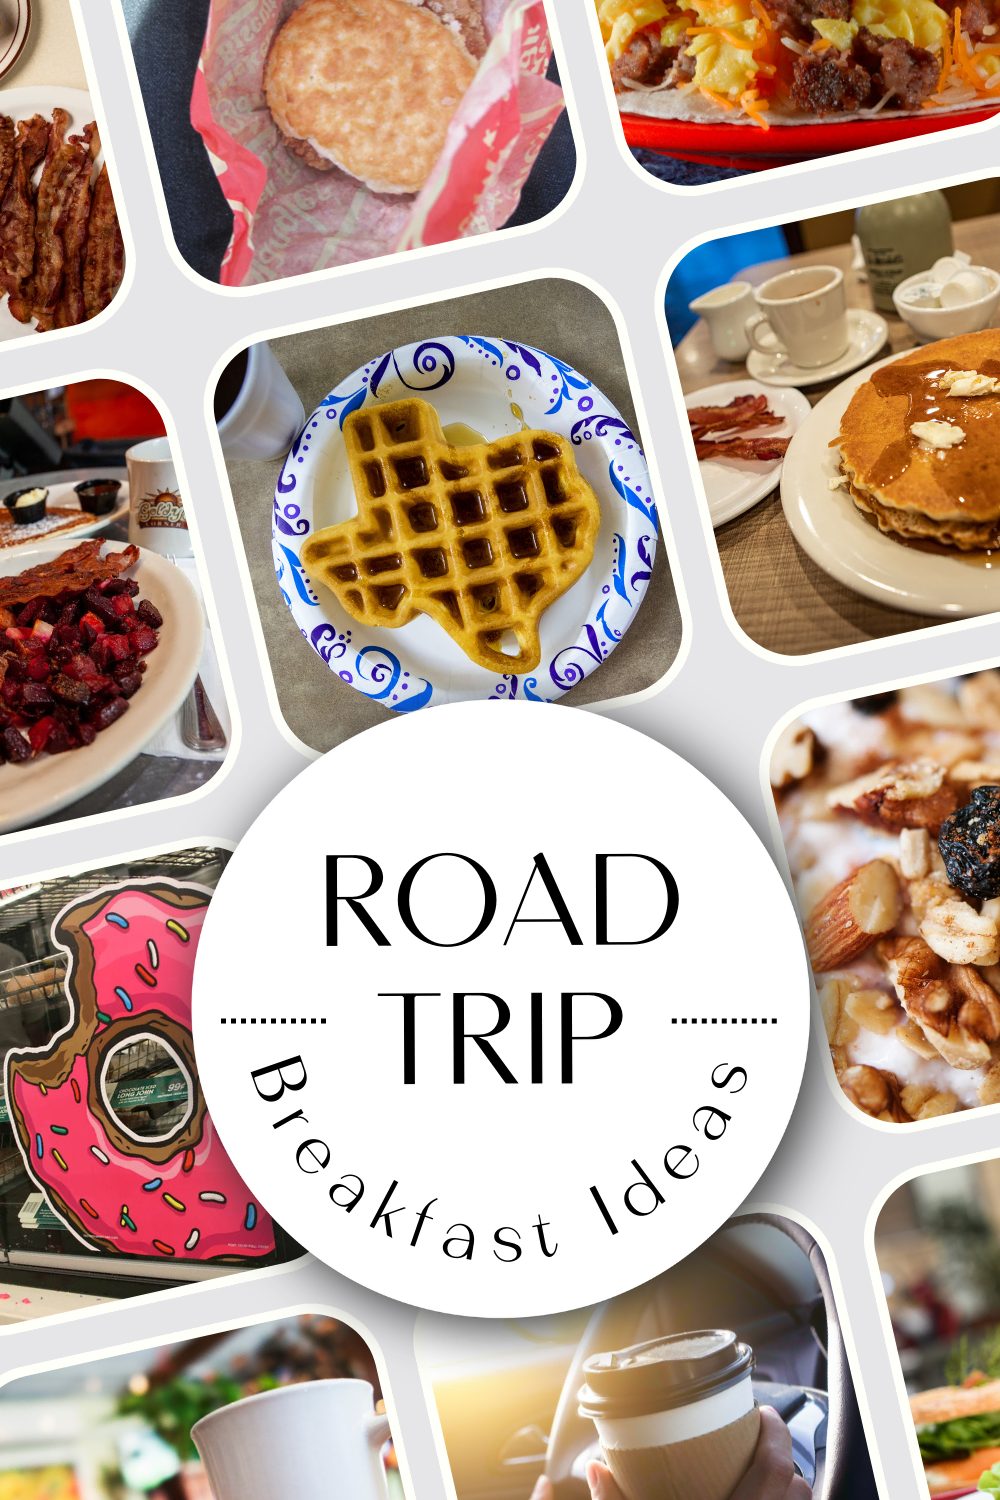 They say that breakfast is the most important meal of the day, and that is especially true on road trips. A good breakfast will give you the fuel you need to get the day going and keep you satisfied as you trek on. So what are some good road trip breakfast ideas? These road trip breakfasts, from diners to fast food to homemade road trip breakfast recipes will give you the fuel you need for your road trip. #RoadTrip #Recipe #BreakFast #RoadTripFood #RoadTripMeals #RoadTrips #RoadTripBreakfast